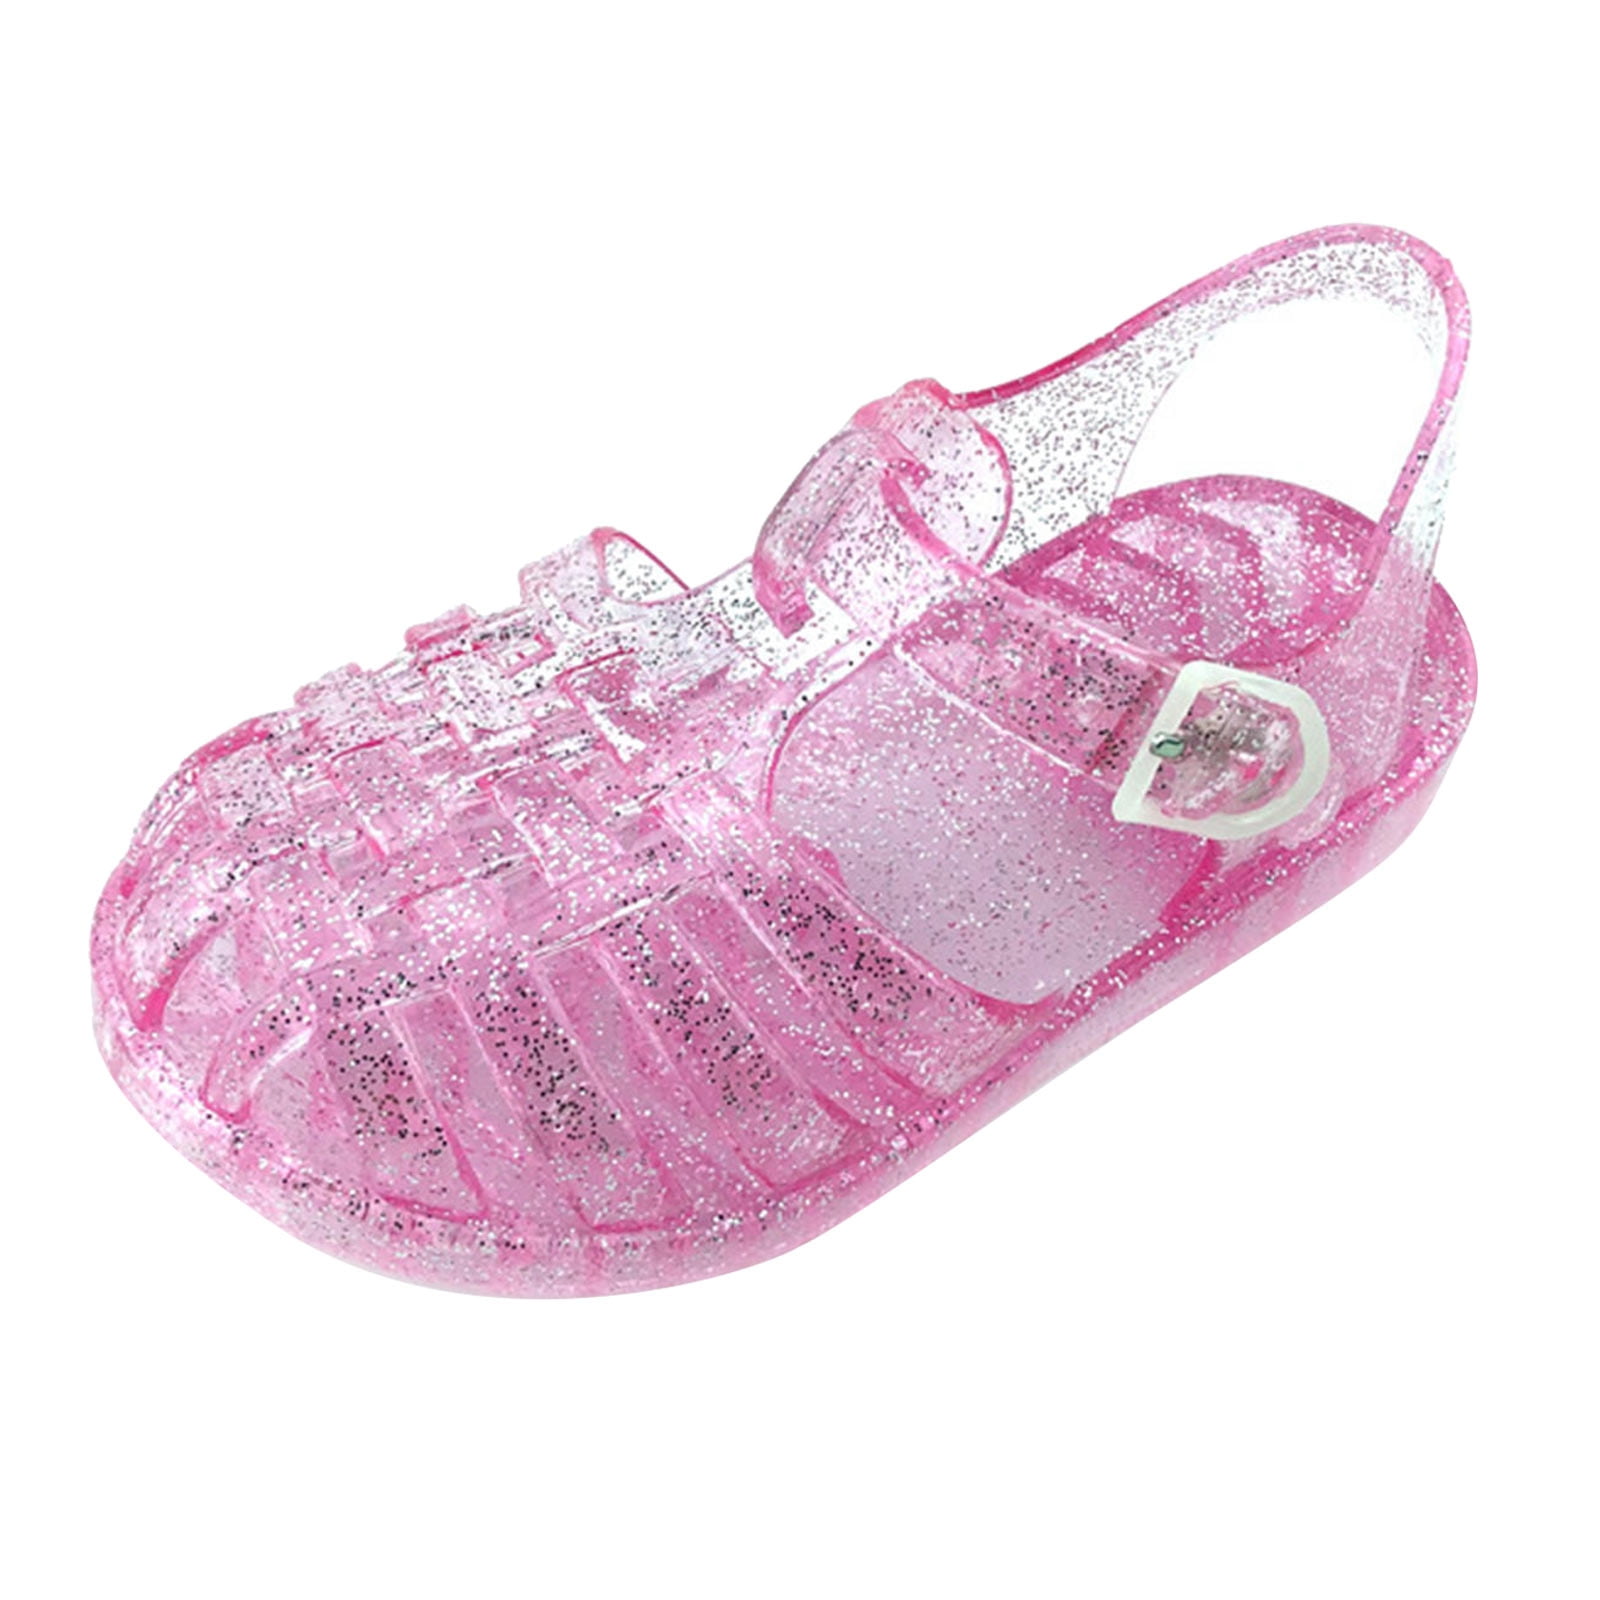 Little Beach Closed Recommended Years Shoes Years Toe Oalirro Kid 4-8 5 - Sandals Selected Girls Fabric PVC Age: